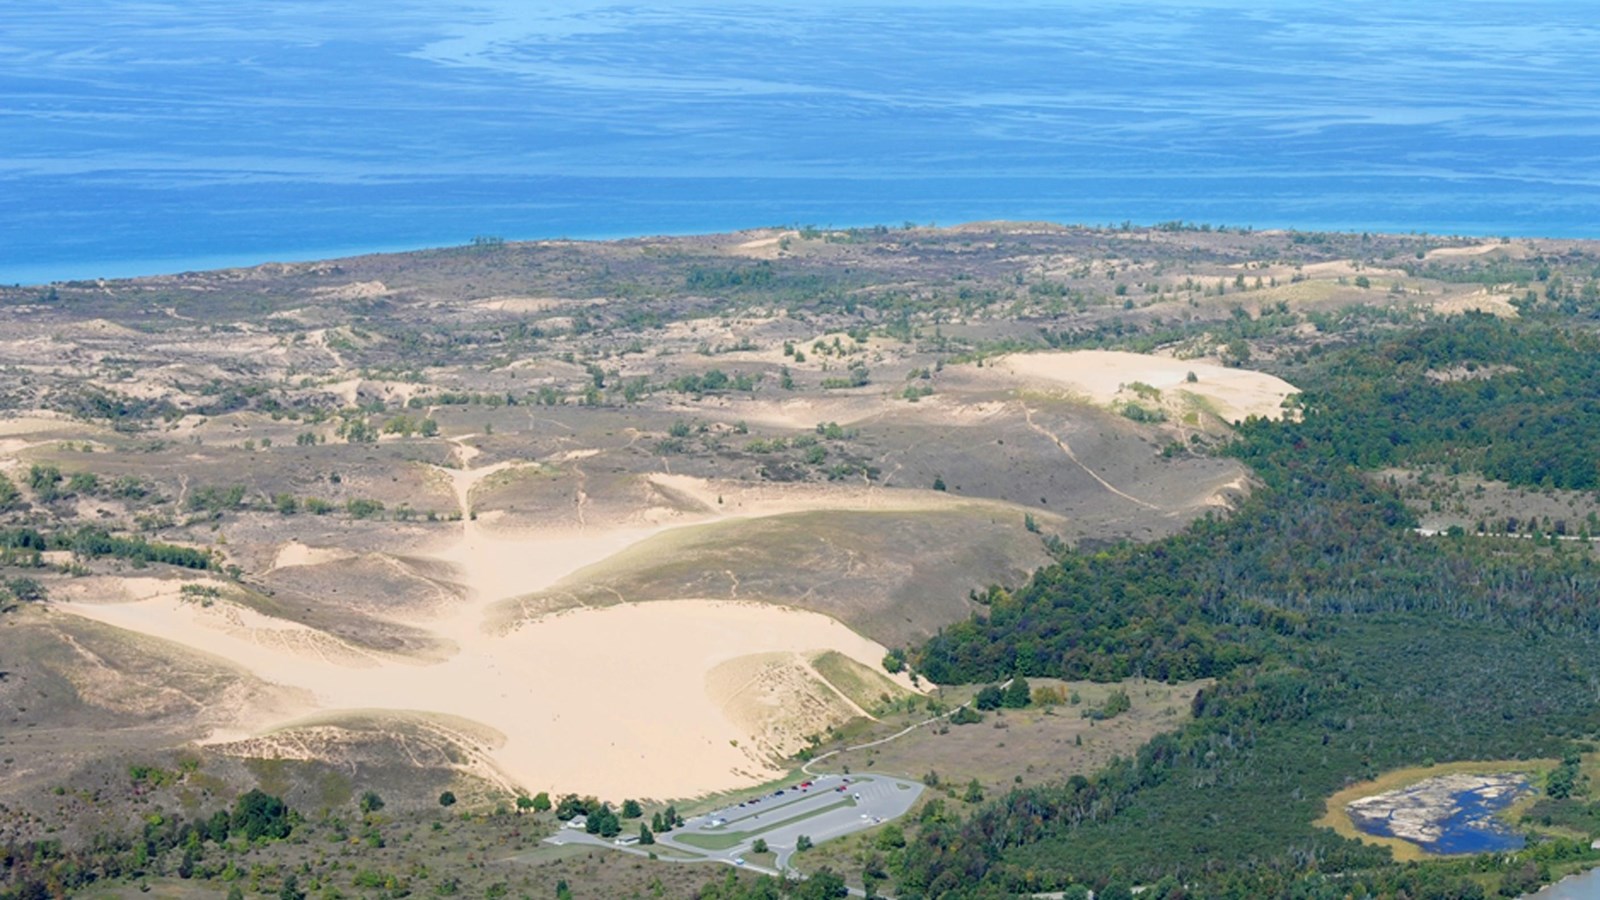 Aerial view of sand dunes and surrounding forest. Lake Michigan is visible in the background.